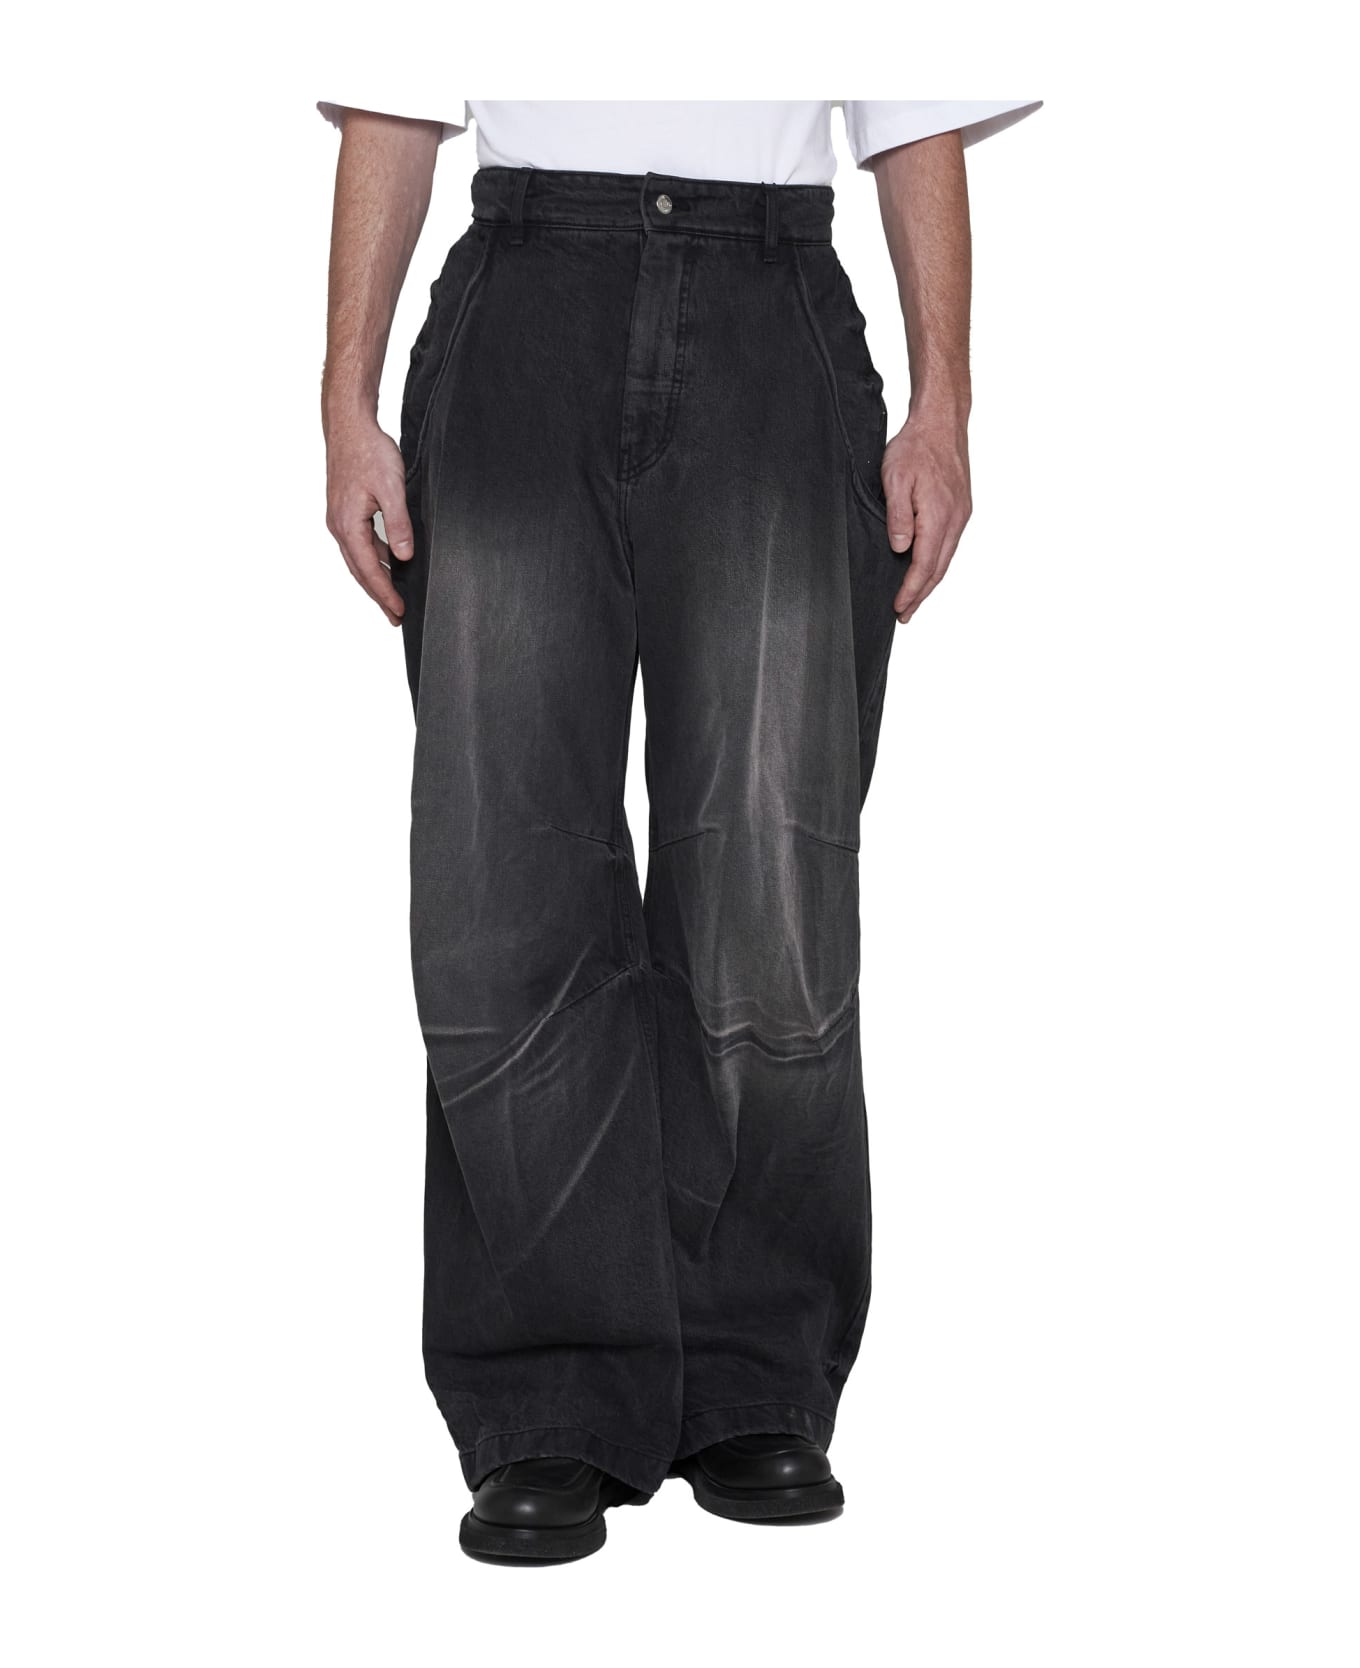 WE11 DONE Jeans - Black